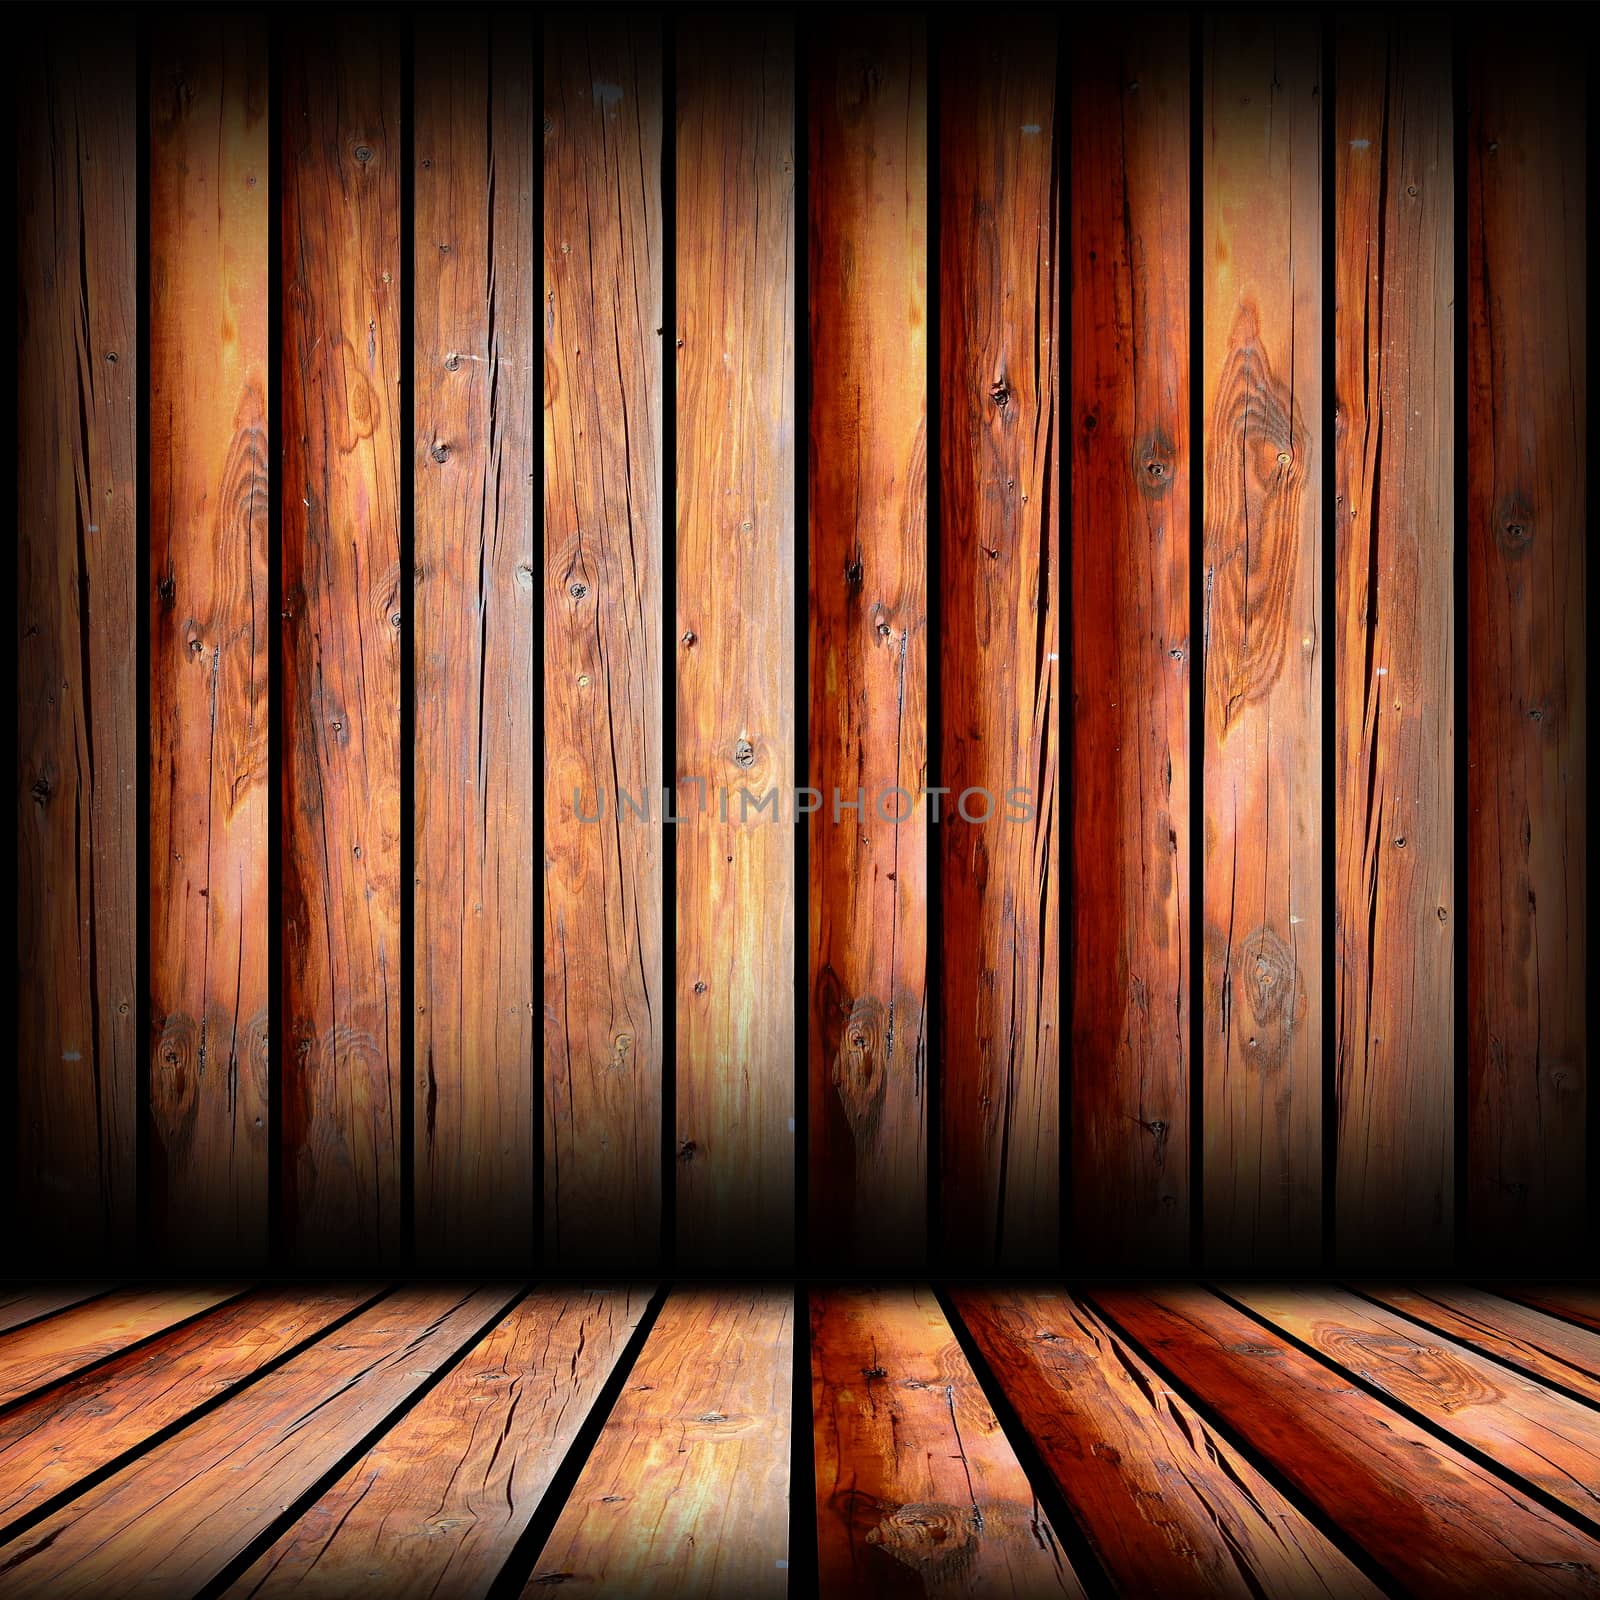 reddish boards on indoor architectural cabin backdrop, wooden finishing